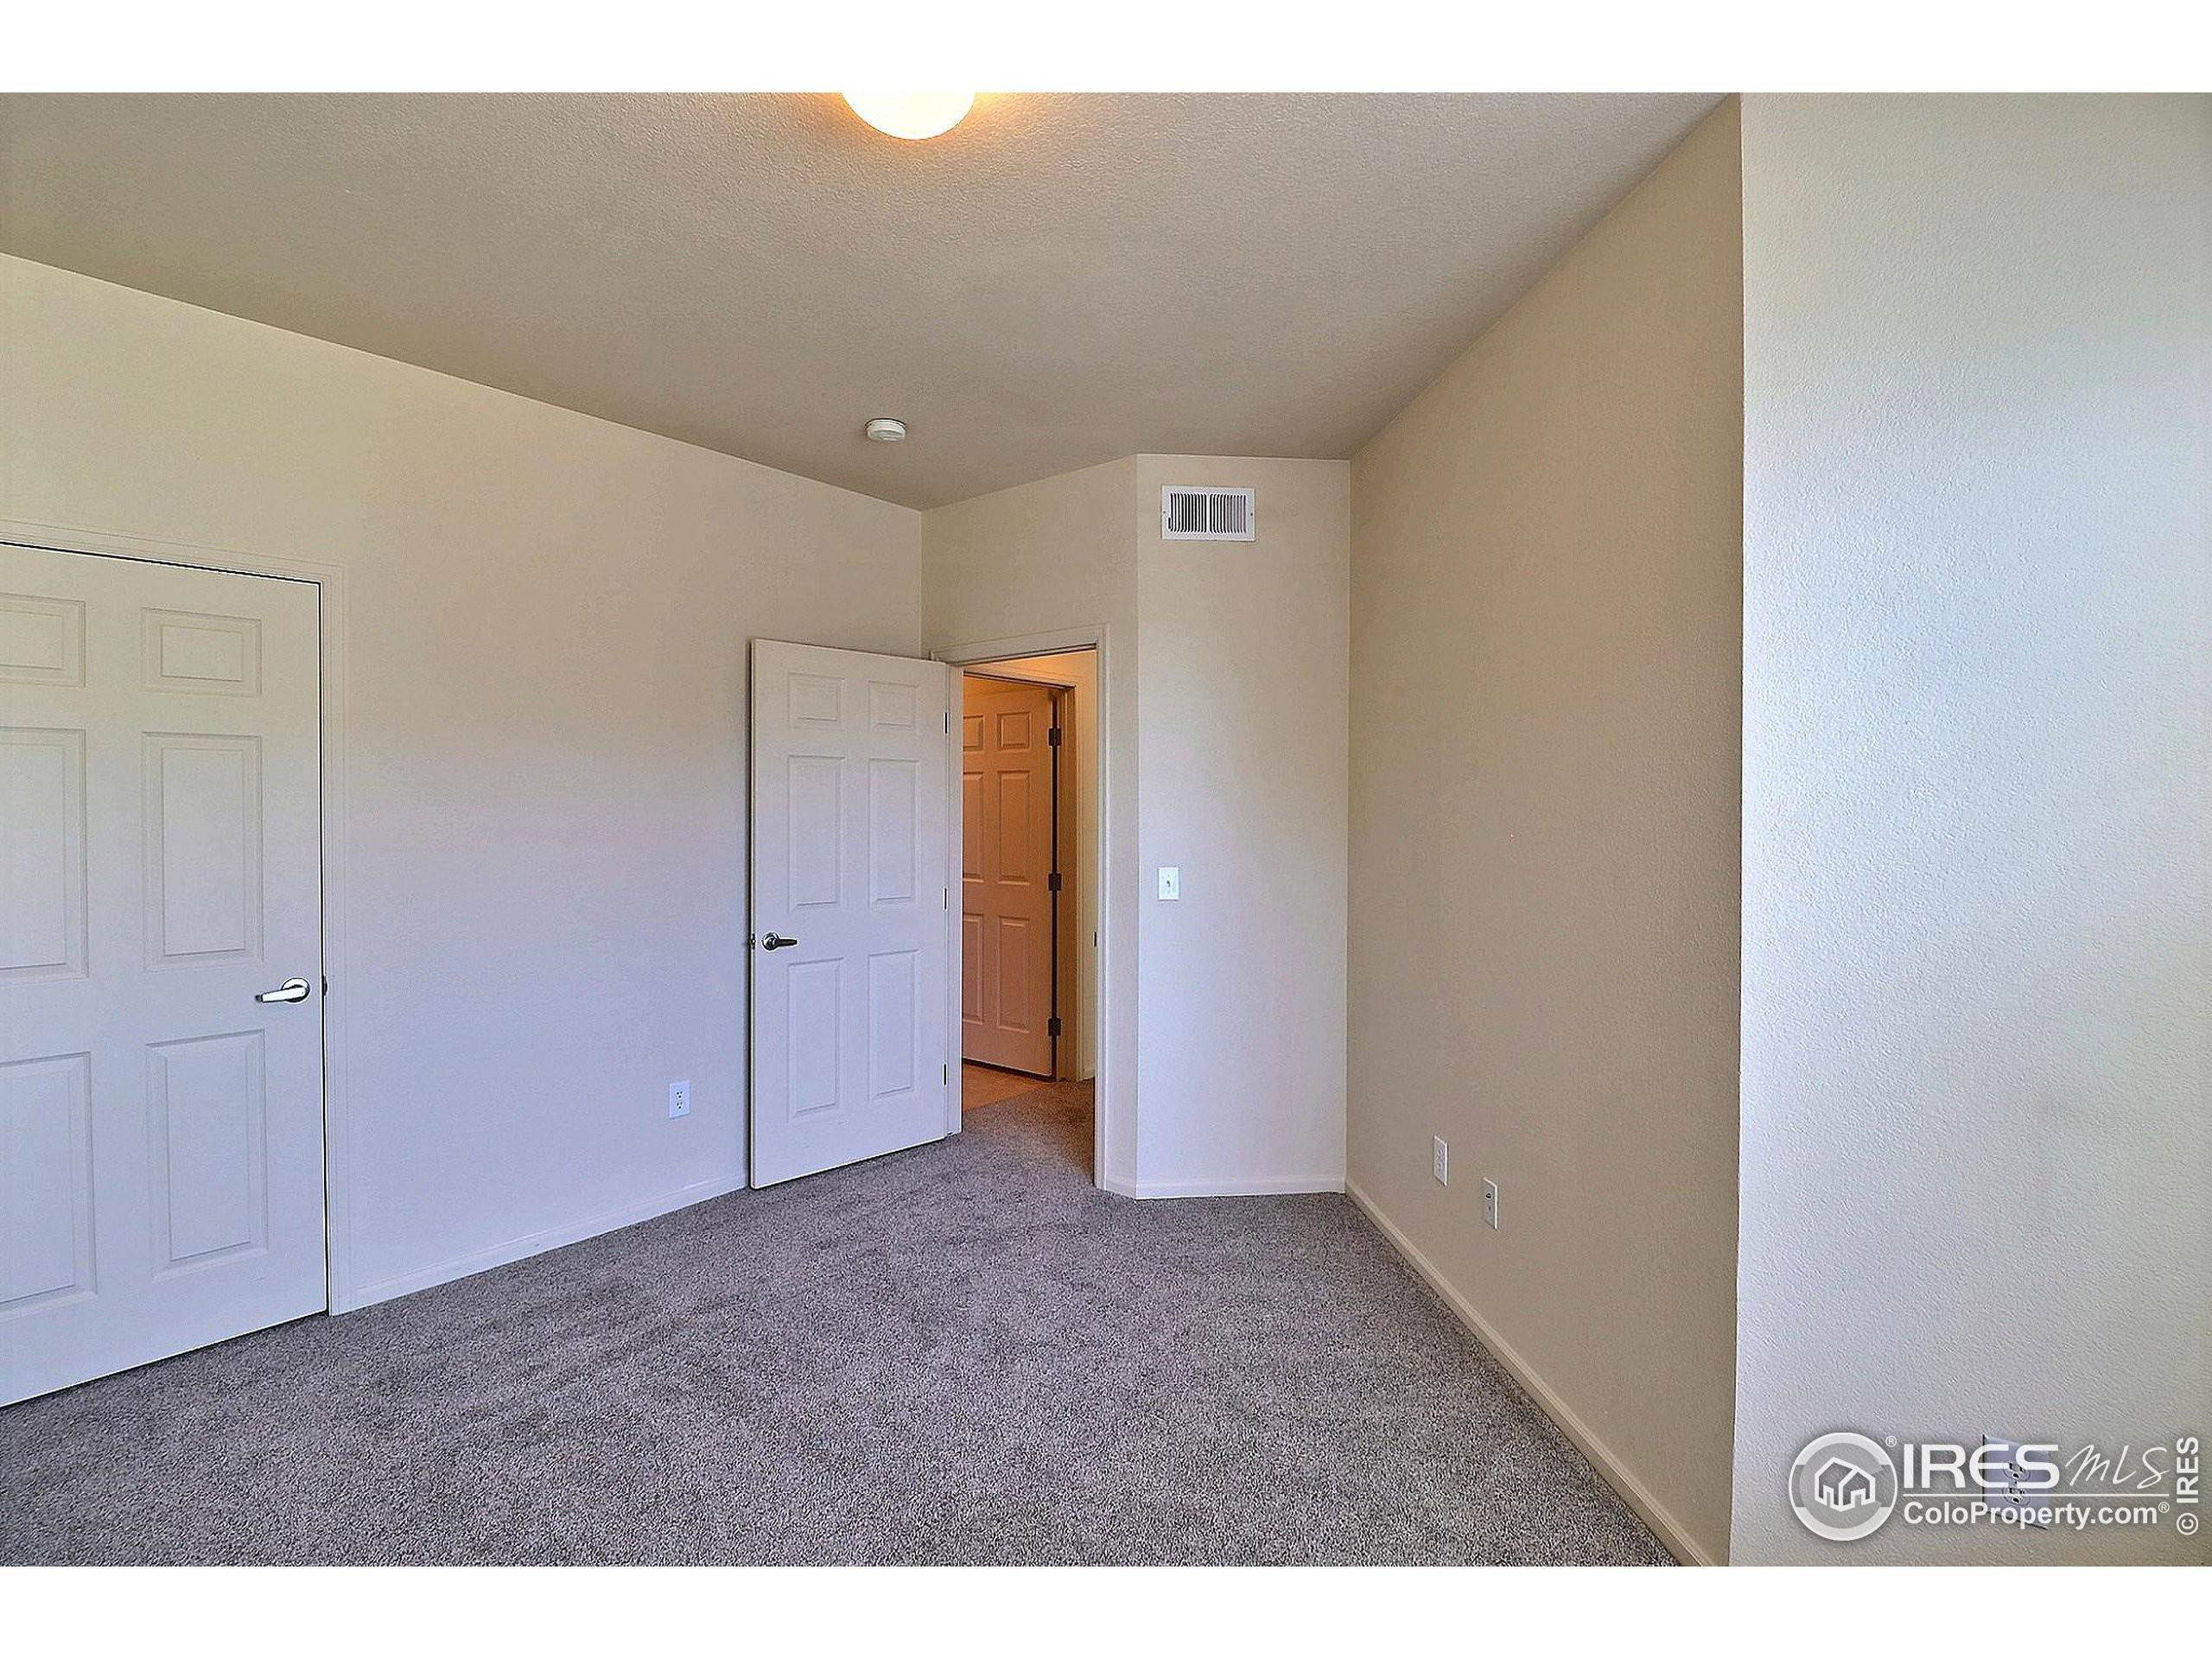 20. Single Family Homes for Active at 2990 W C Street 62-102 Greeley, Colorado 80631 United States